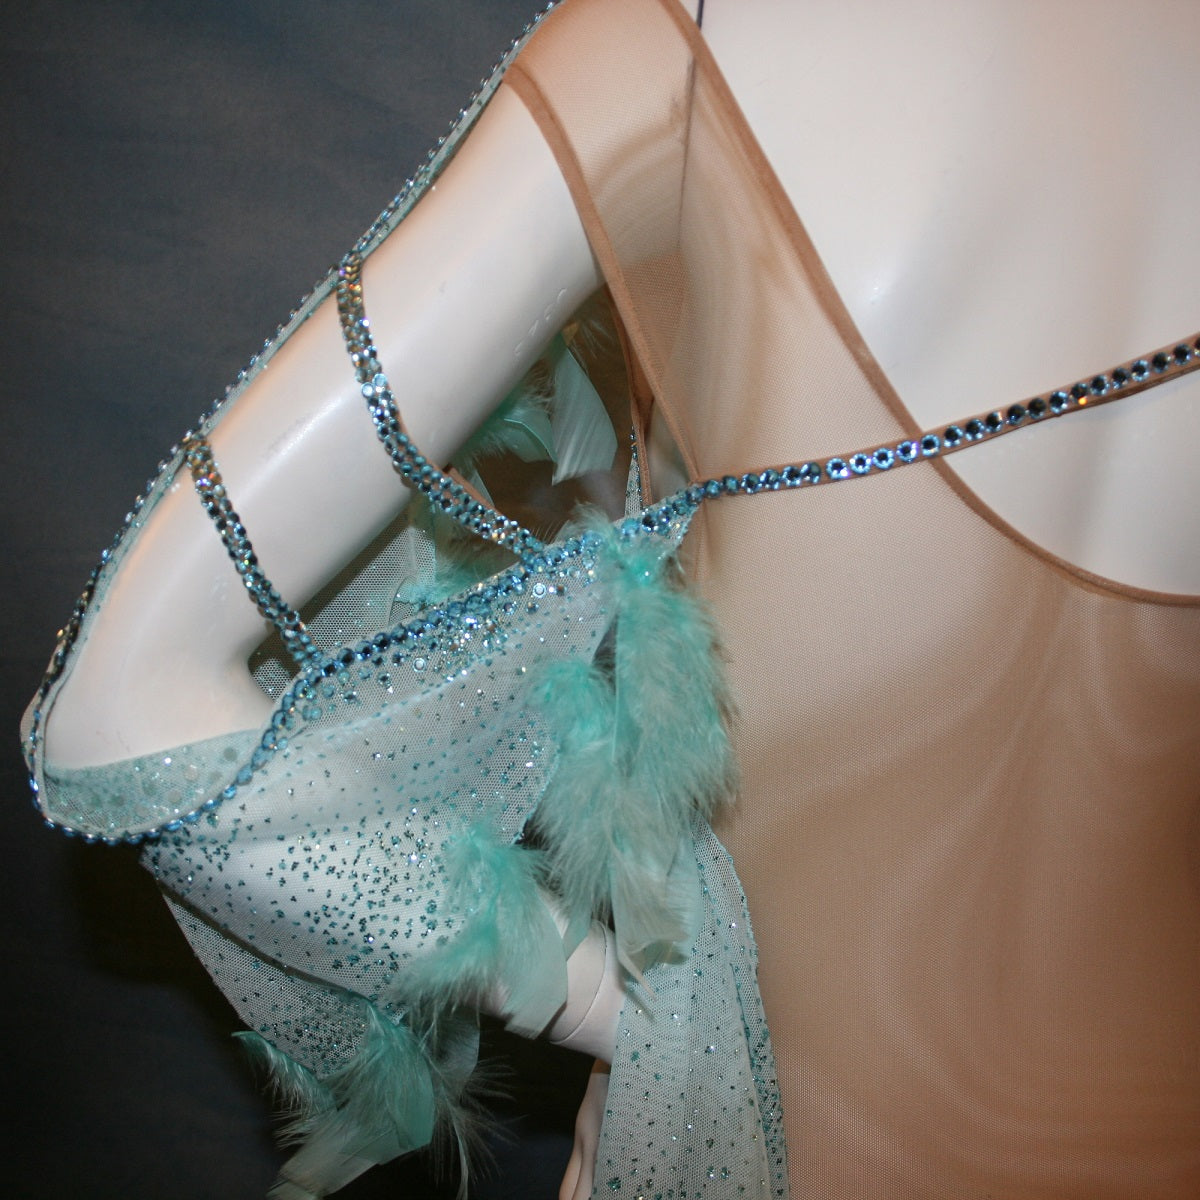 Crystal's Creations back shoulder view of Aqua blue ballroom dress created in gorgeous aqua blue glitter sheer mesh overlaid on a nude illusion base has lots of gorgeous aqua chandelle feathers, embellished with aquamarine Swarovski rhinestone work. This ballroom dress also features delicate Swarovski embellished strap detailing.